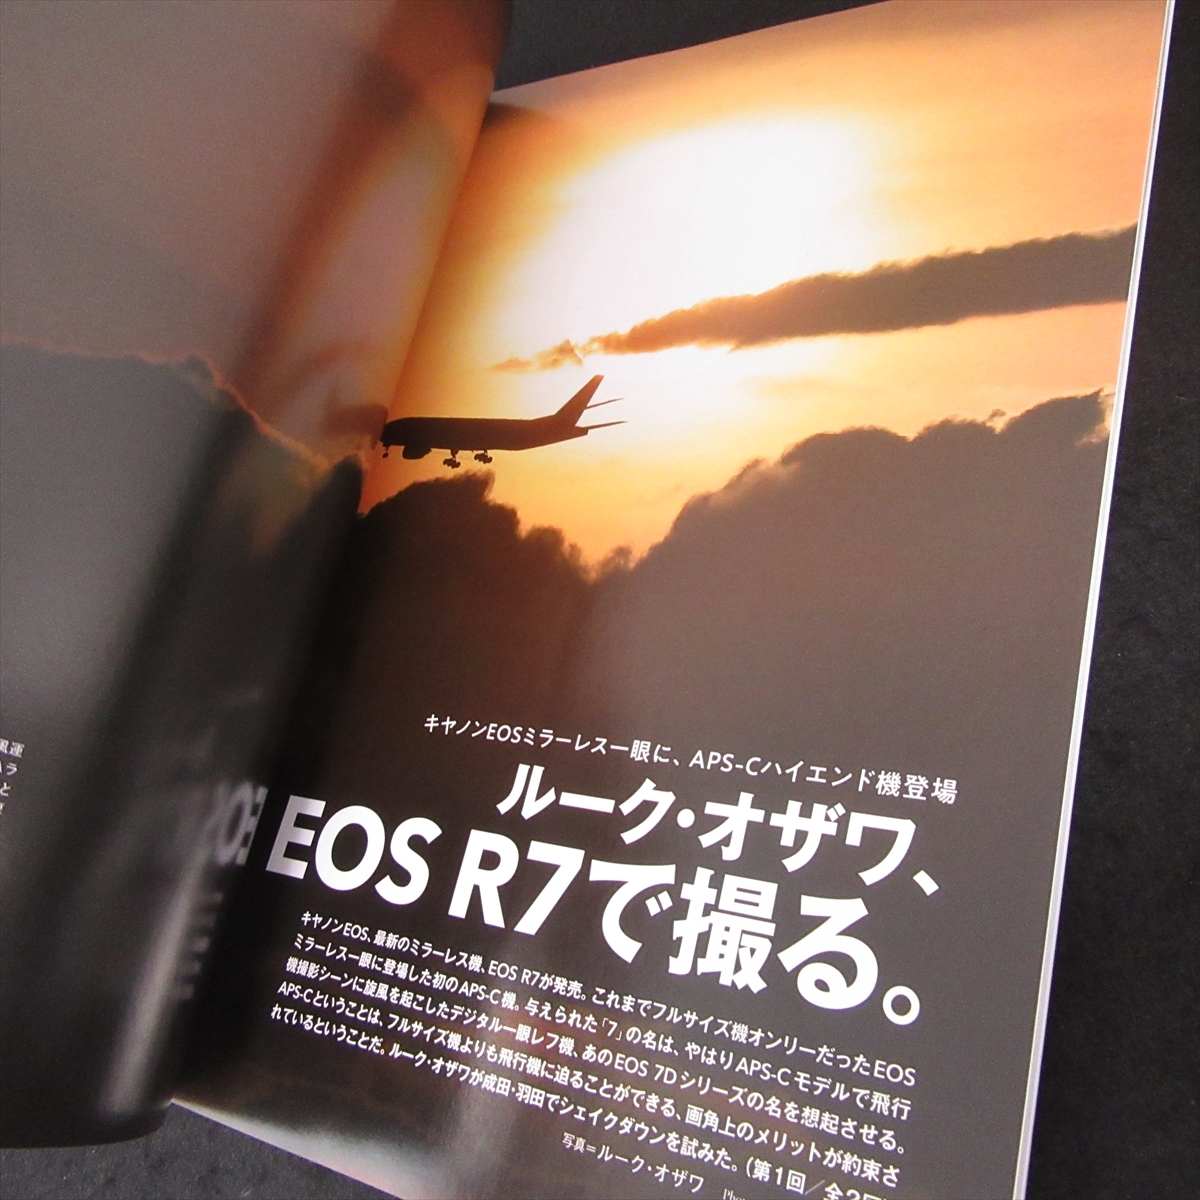  magazine [ monthly Eara in 2022 year 9 month number ] # sending 170 jpy special collection : passenger plane. mechanism /777-200ER JA715A BOEING 777 other AIRLINE*